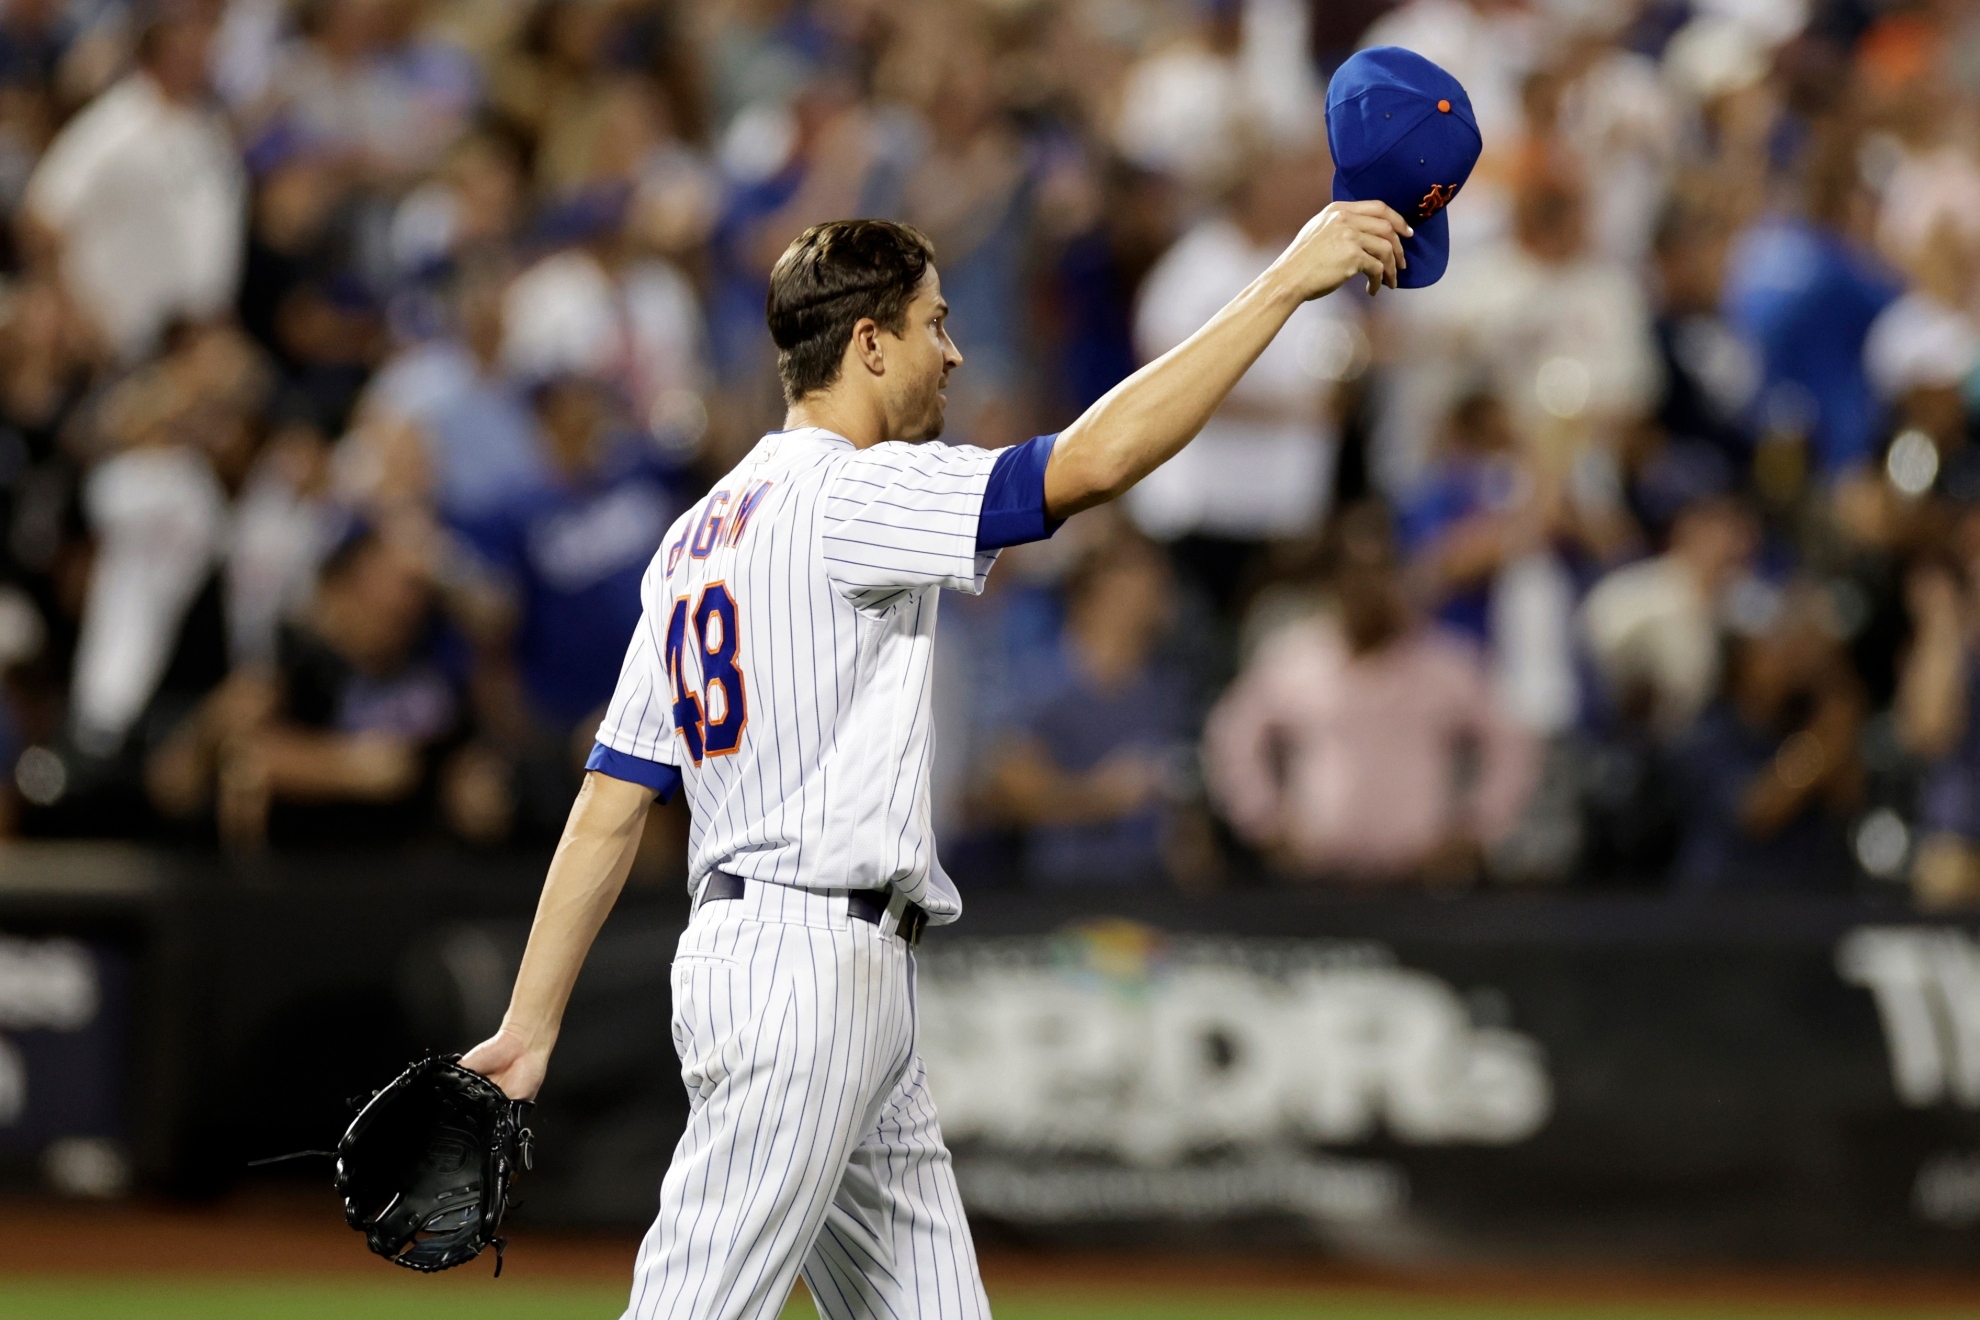 New York Mets pitcher Jacob deGrom tips his cap to Brandon Nimmo during the seventh inning of the team's baseball game against the Los Angeles Dodgers on Wednesday, Aug. 31, 2022, in New York. The Mets won 2-1. / AP